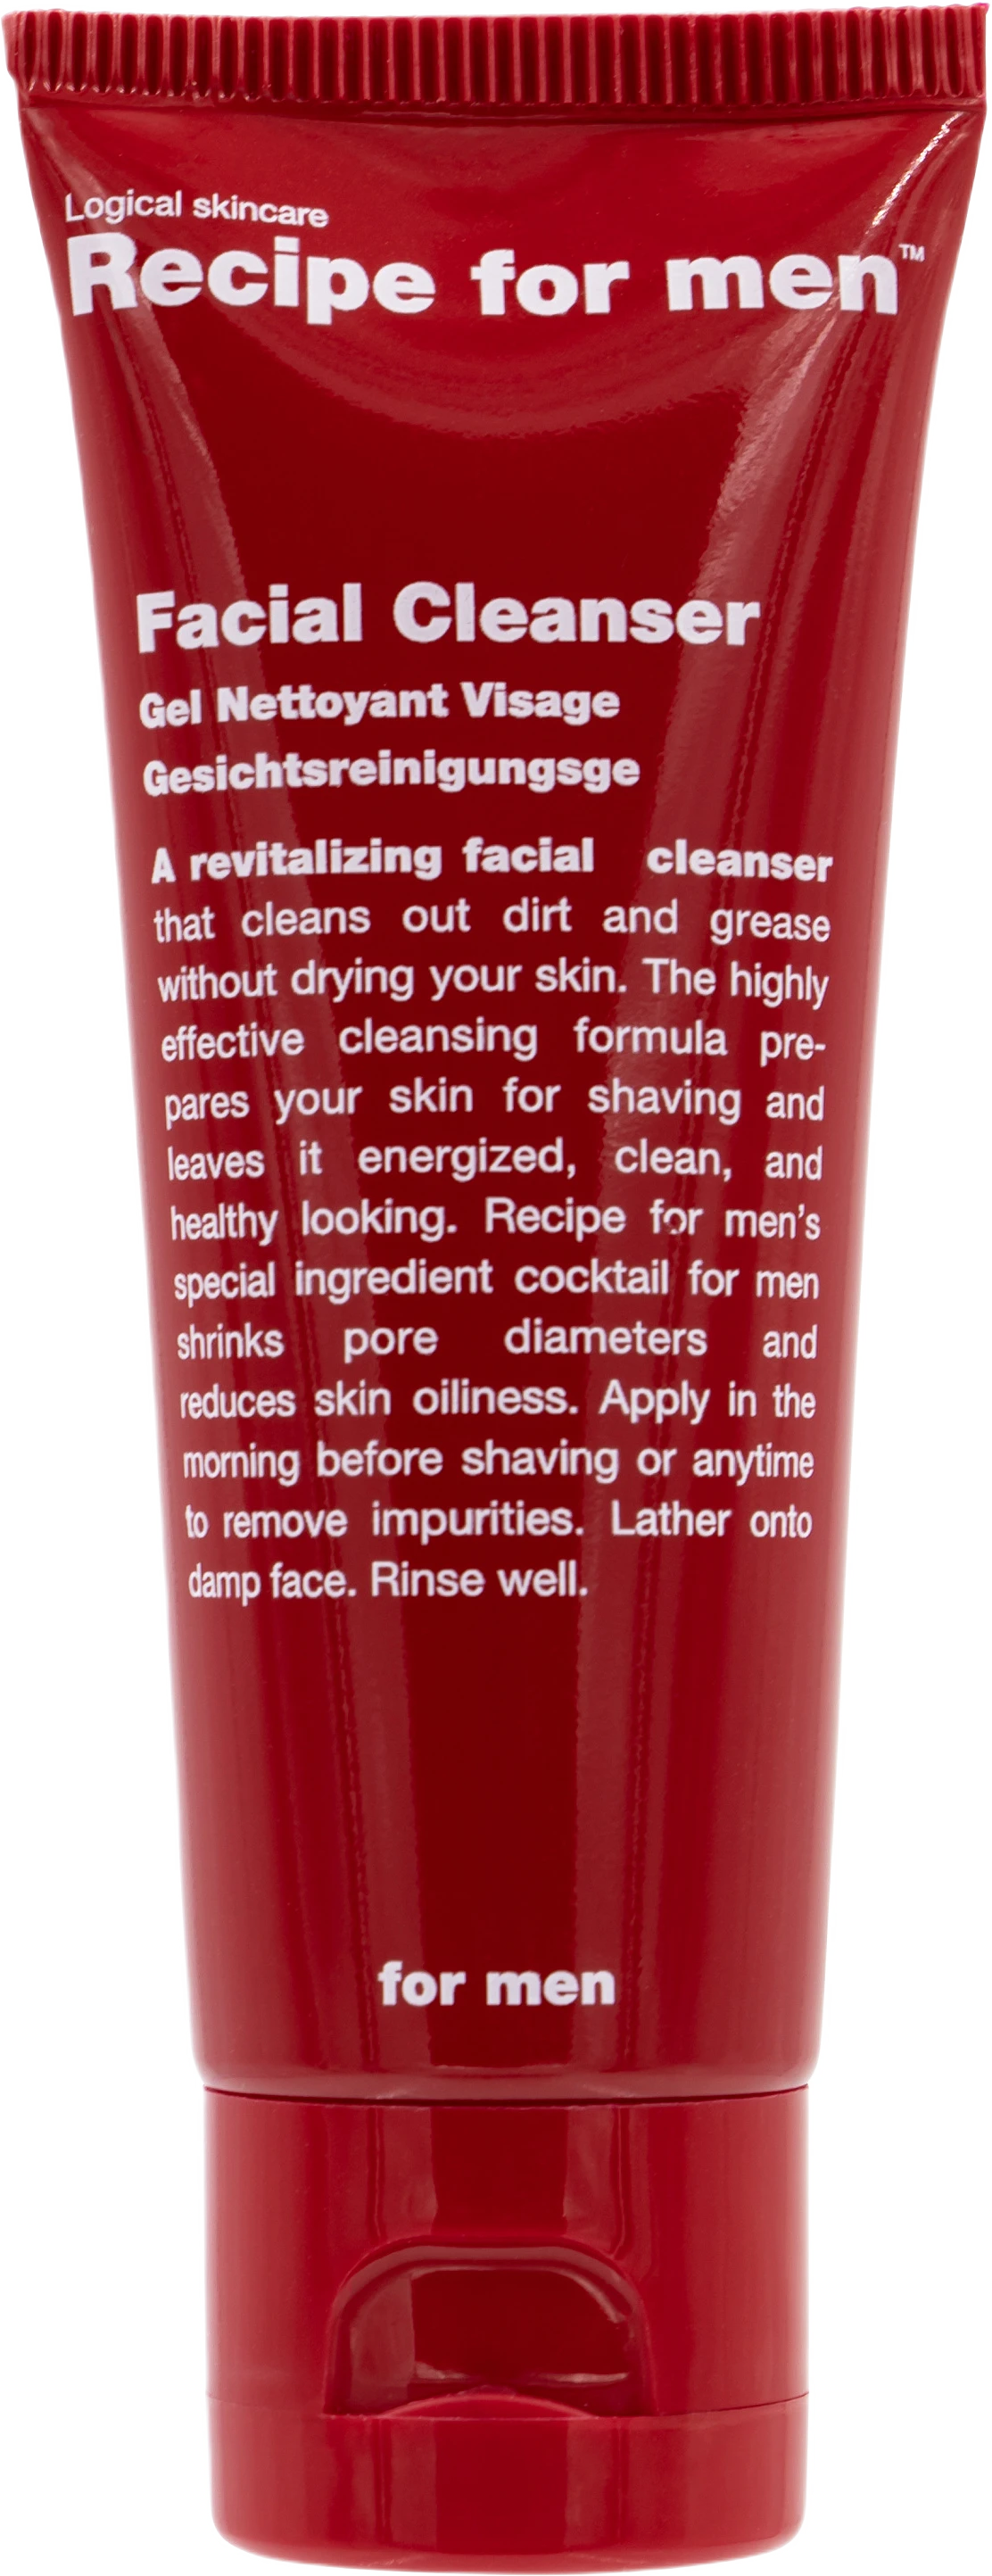 Facial Cleanser travel